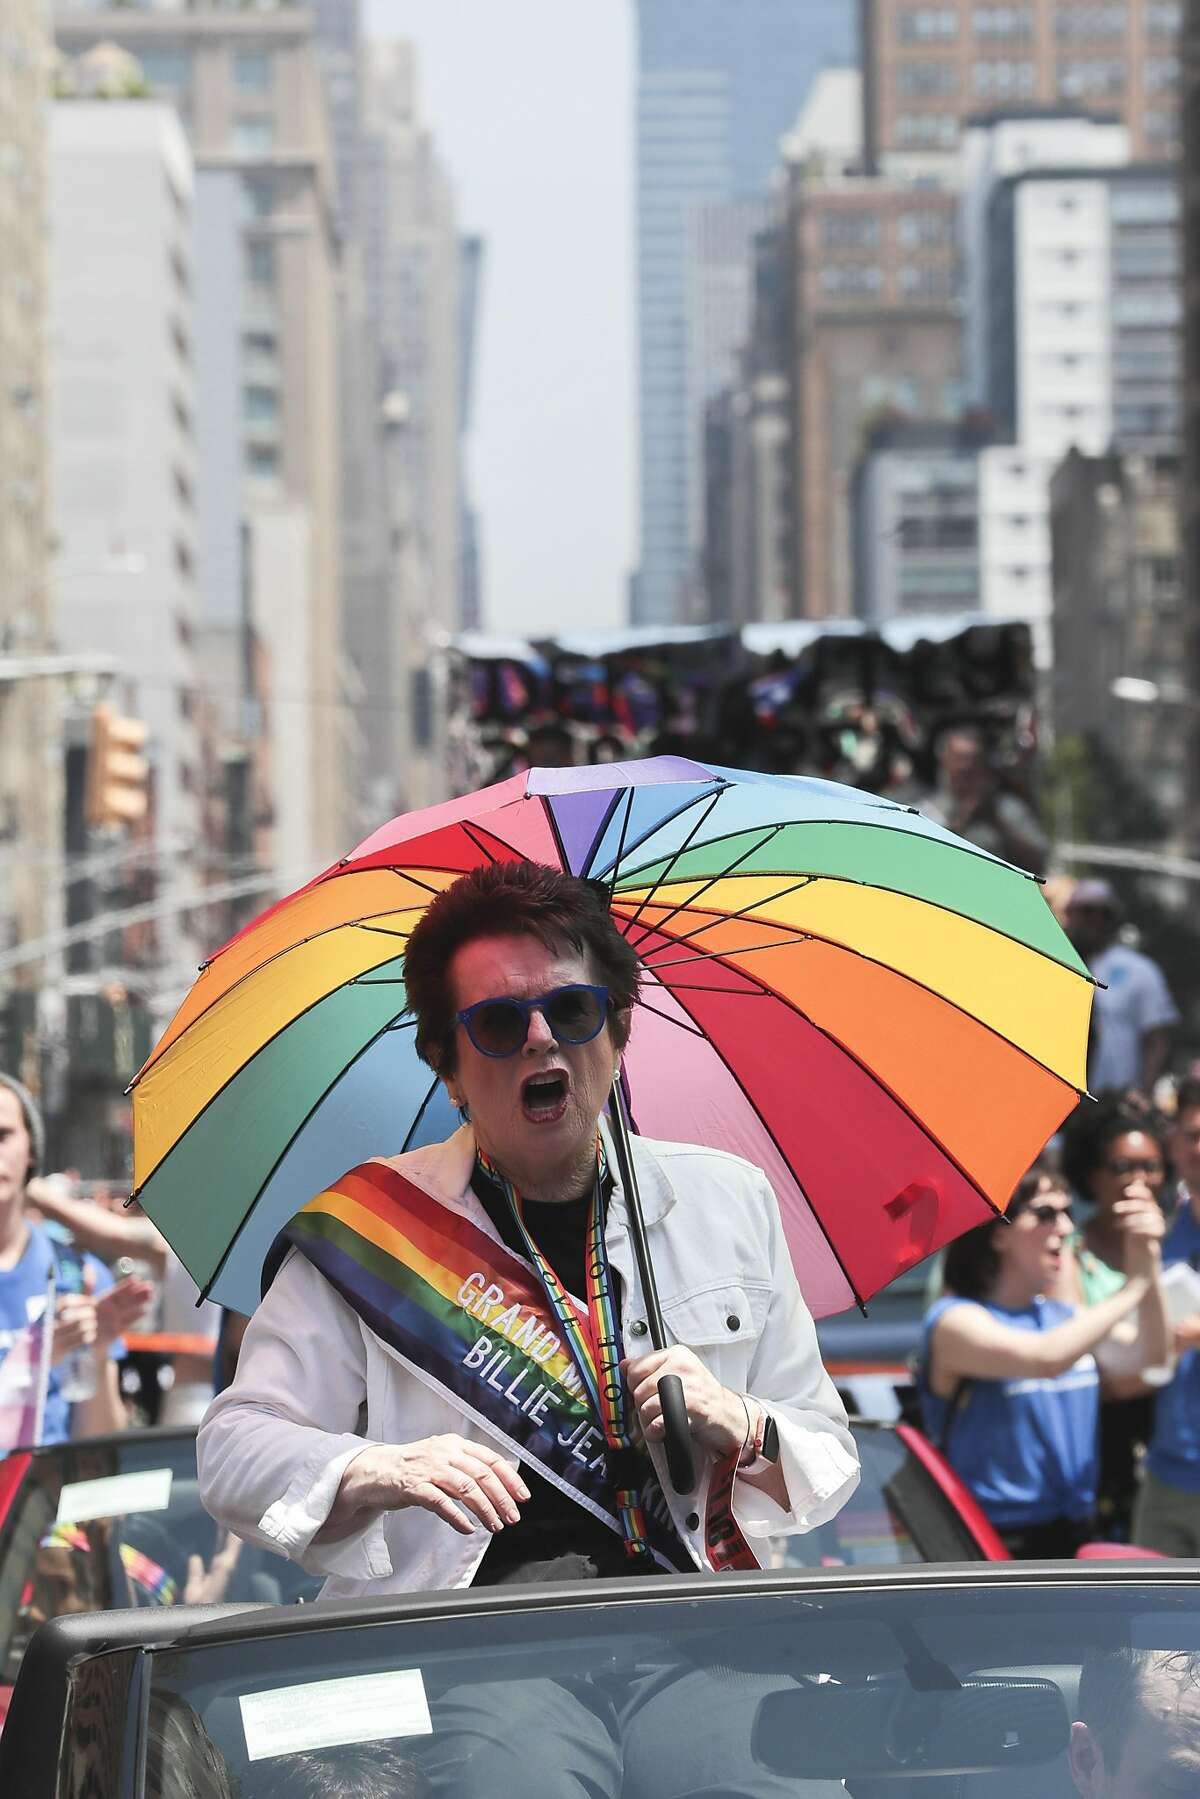 Billie Jean King, the grand marshal for the parade, during the New York City Pride March, June 24, 2018. (Emma Howells/The New York Times)